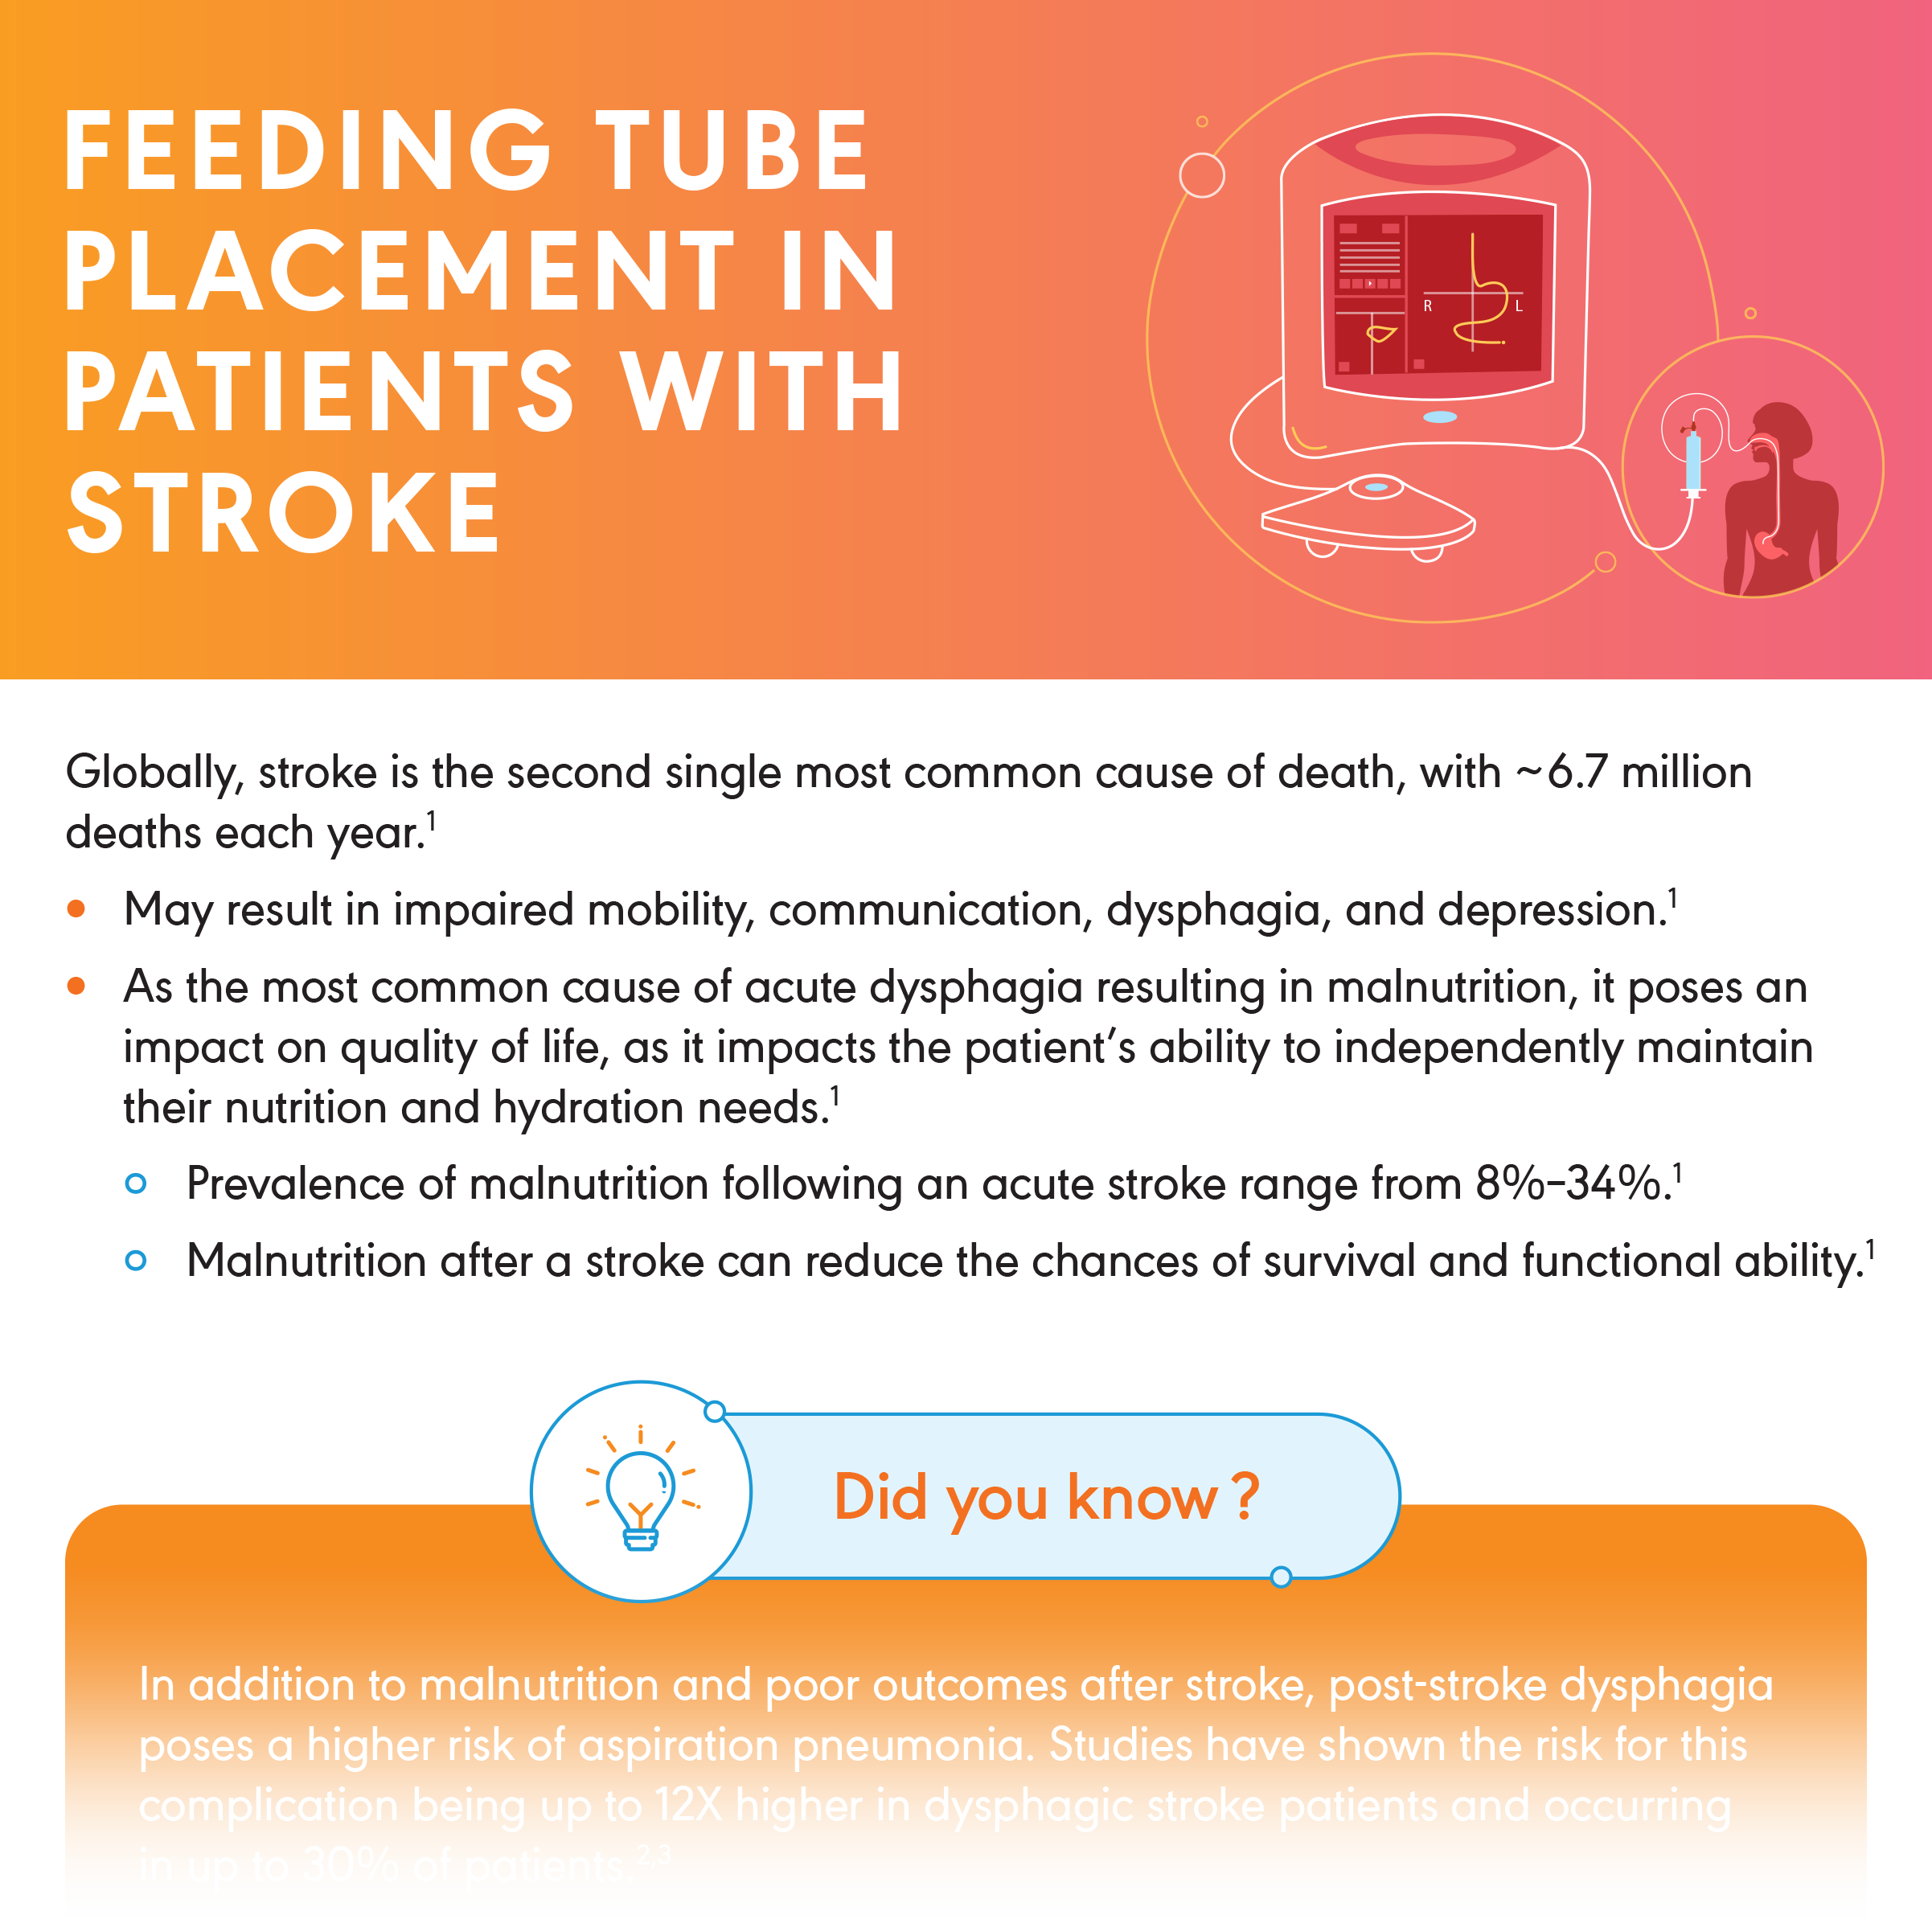 Feeding Tube Placement in Patients with Stroke